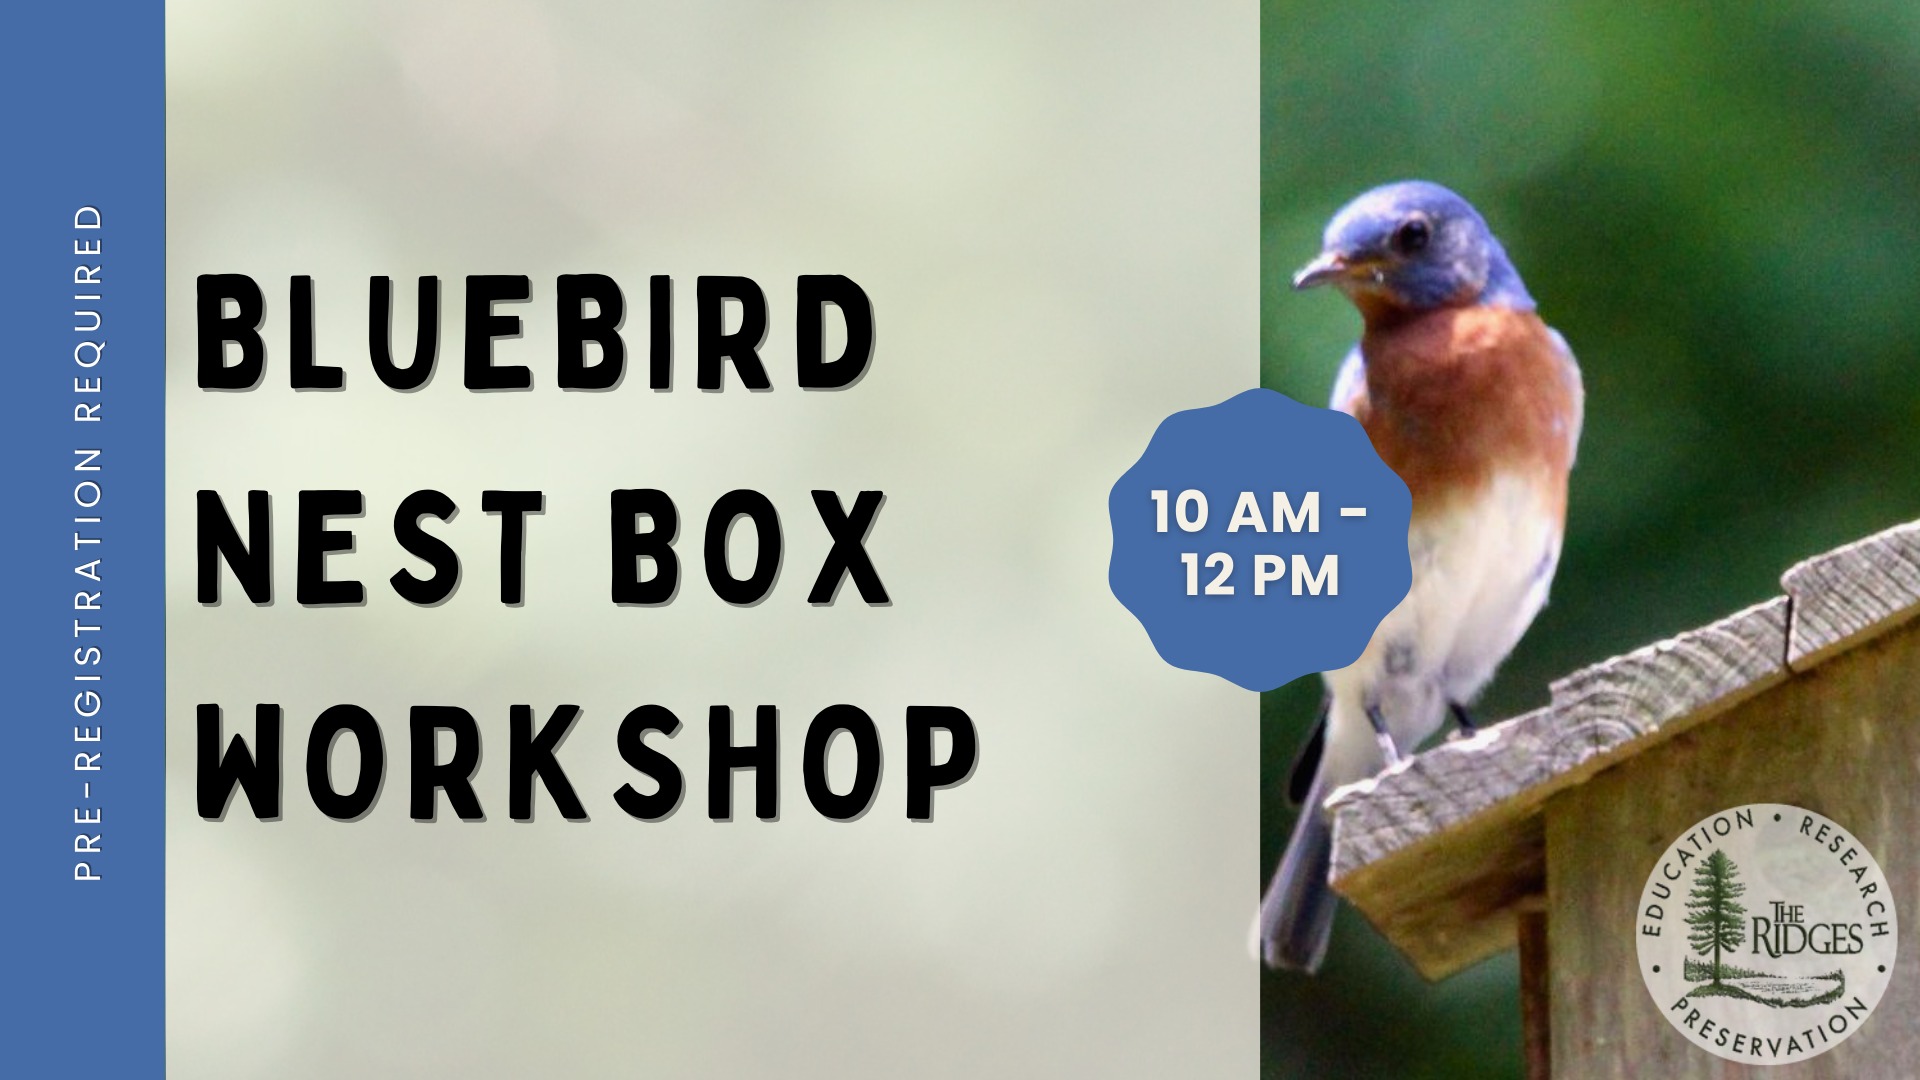 Promo for Bluebird Nest Box Workshop with a small bluebird on a branch.